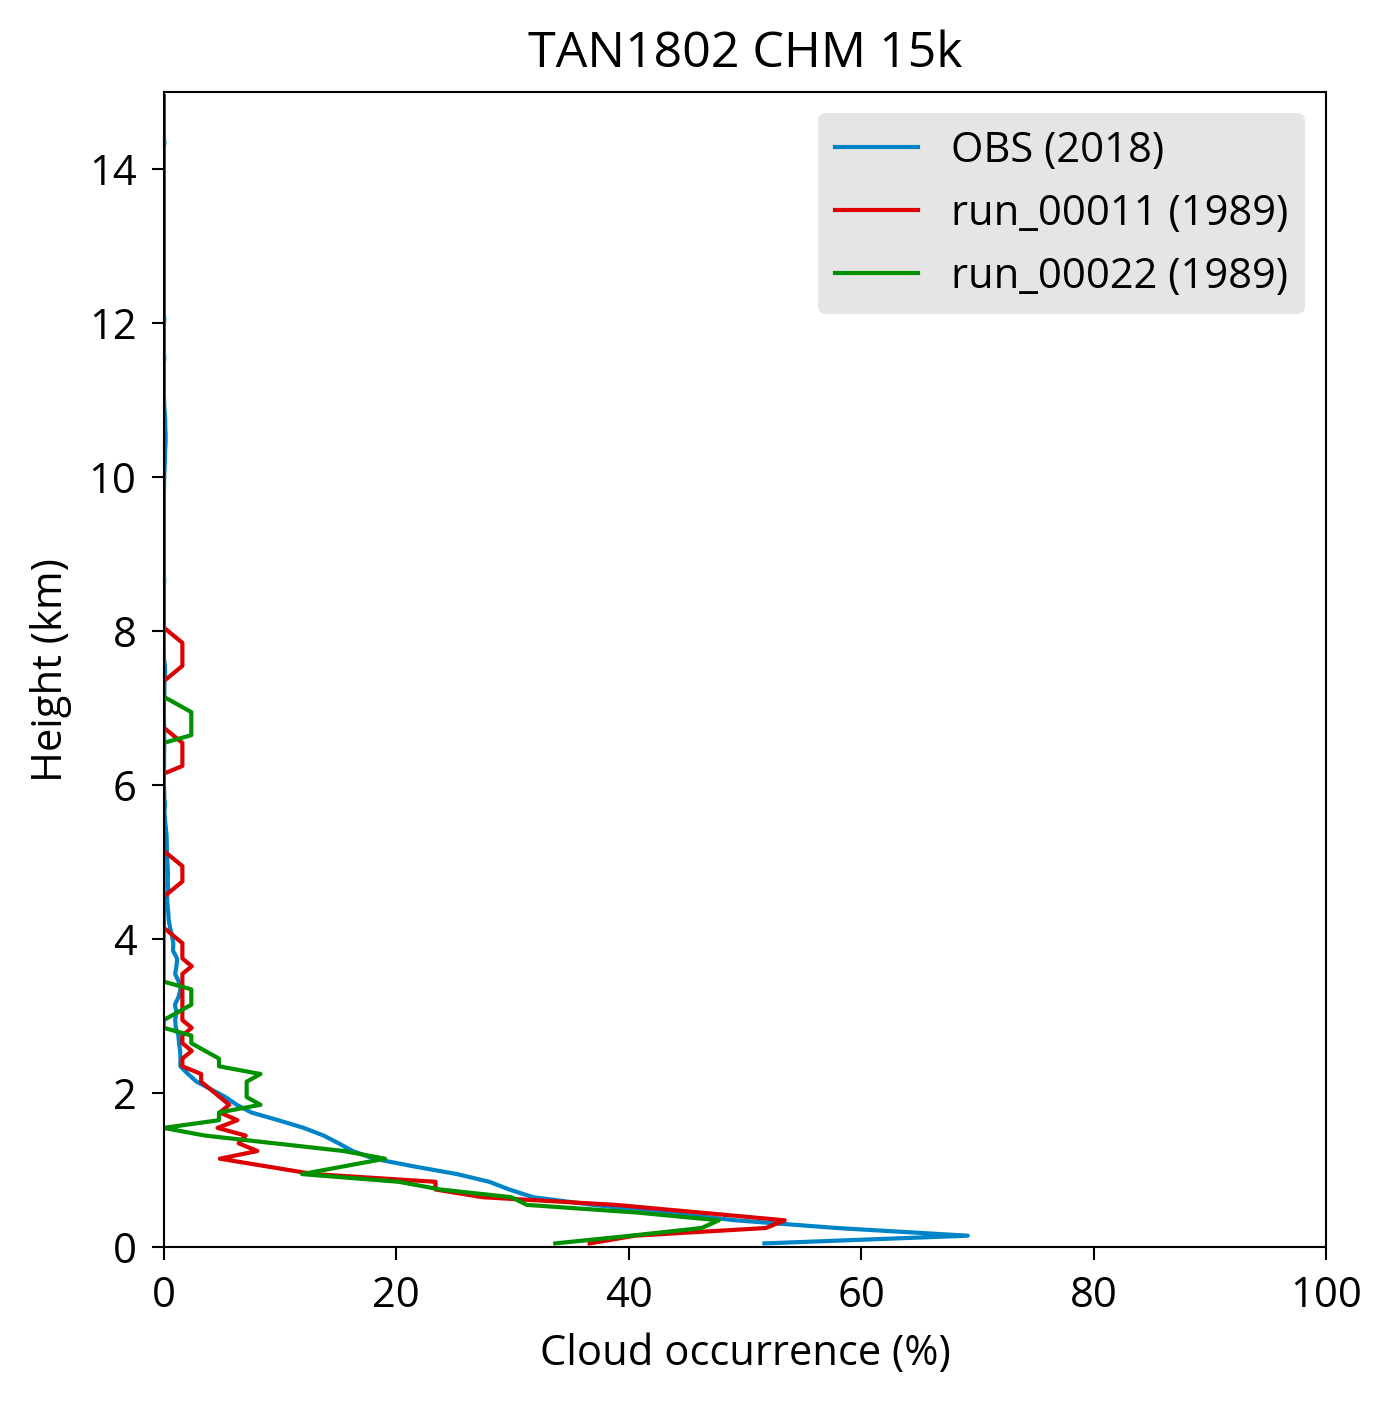 A plot of TAN1802 CHM 15k cloud occurrence by height